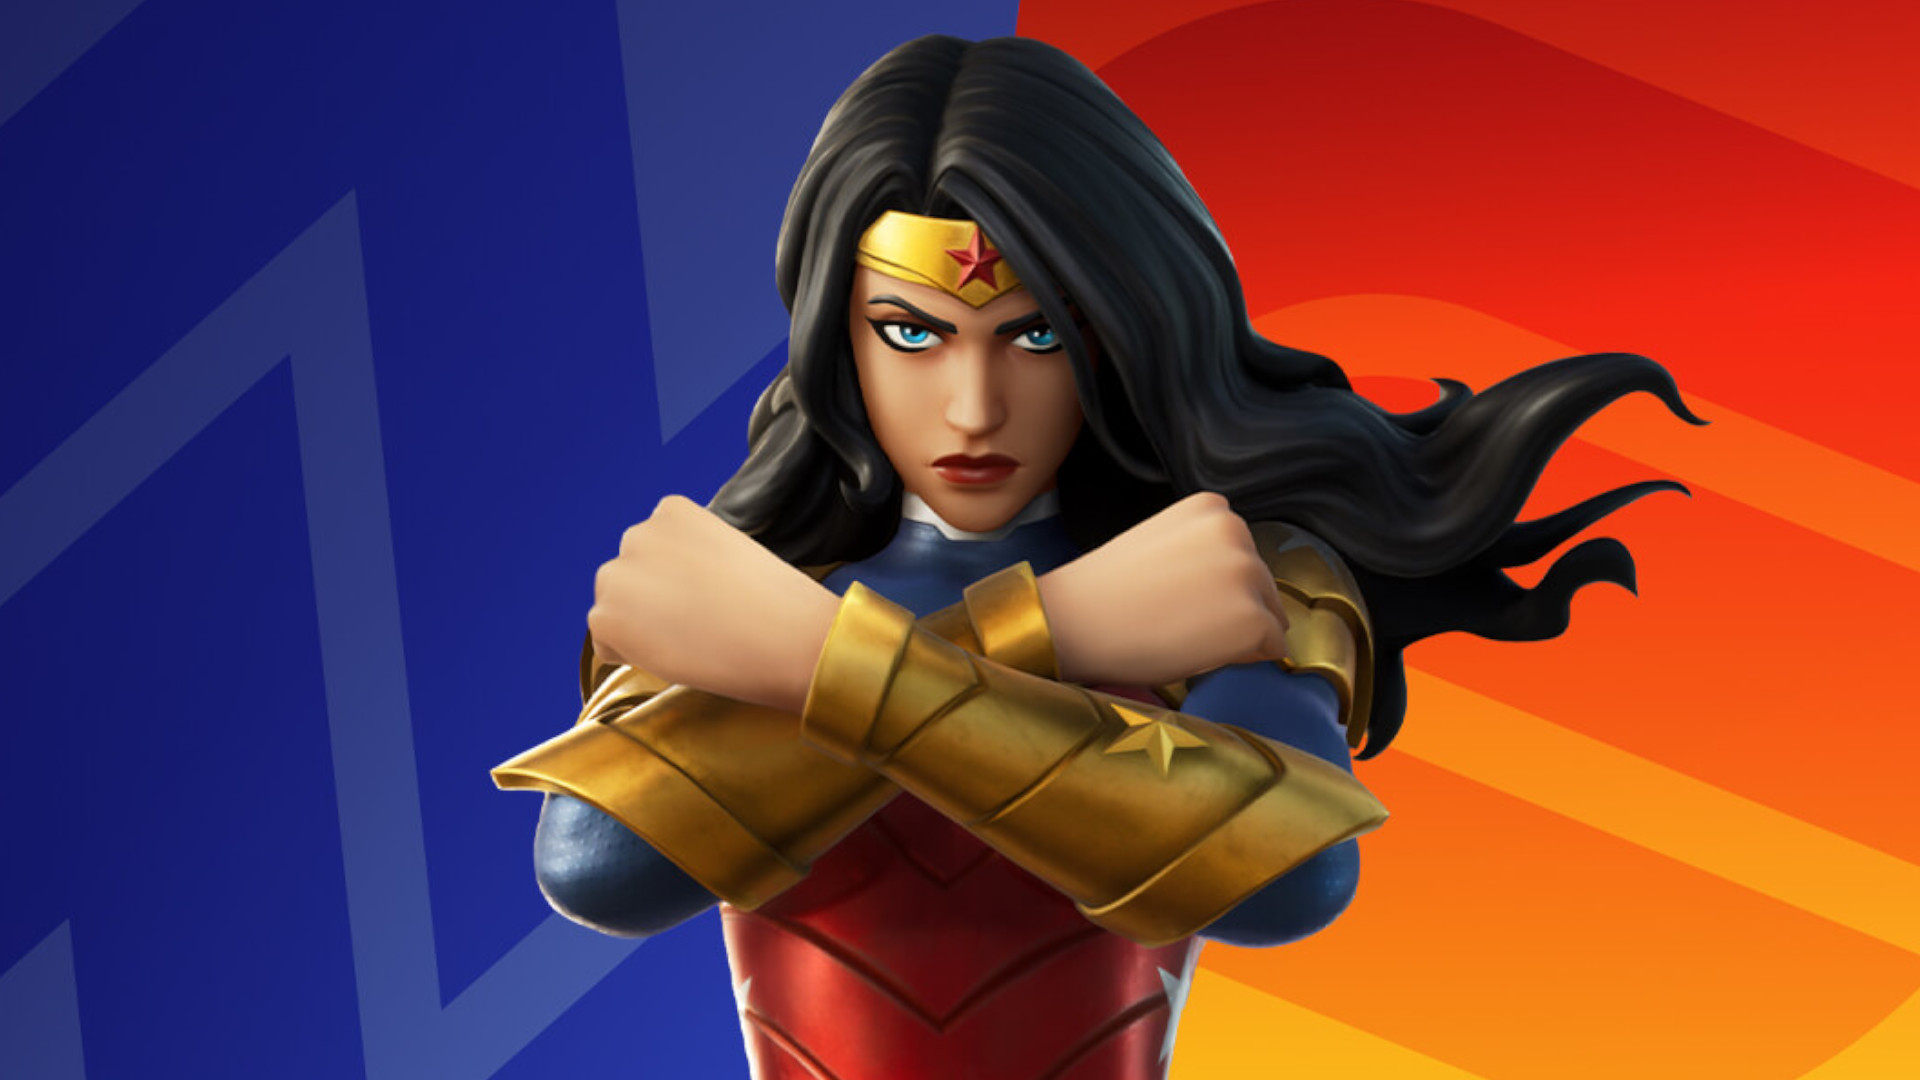 Wonder Woman comes to Fortnite, and you can win her for free